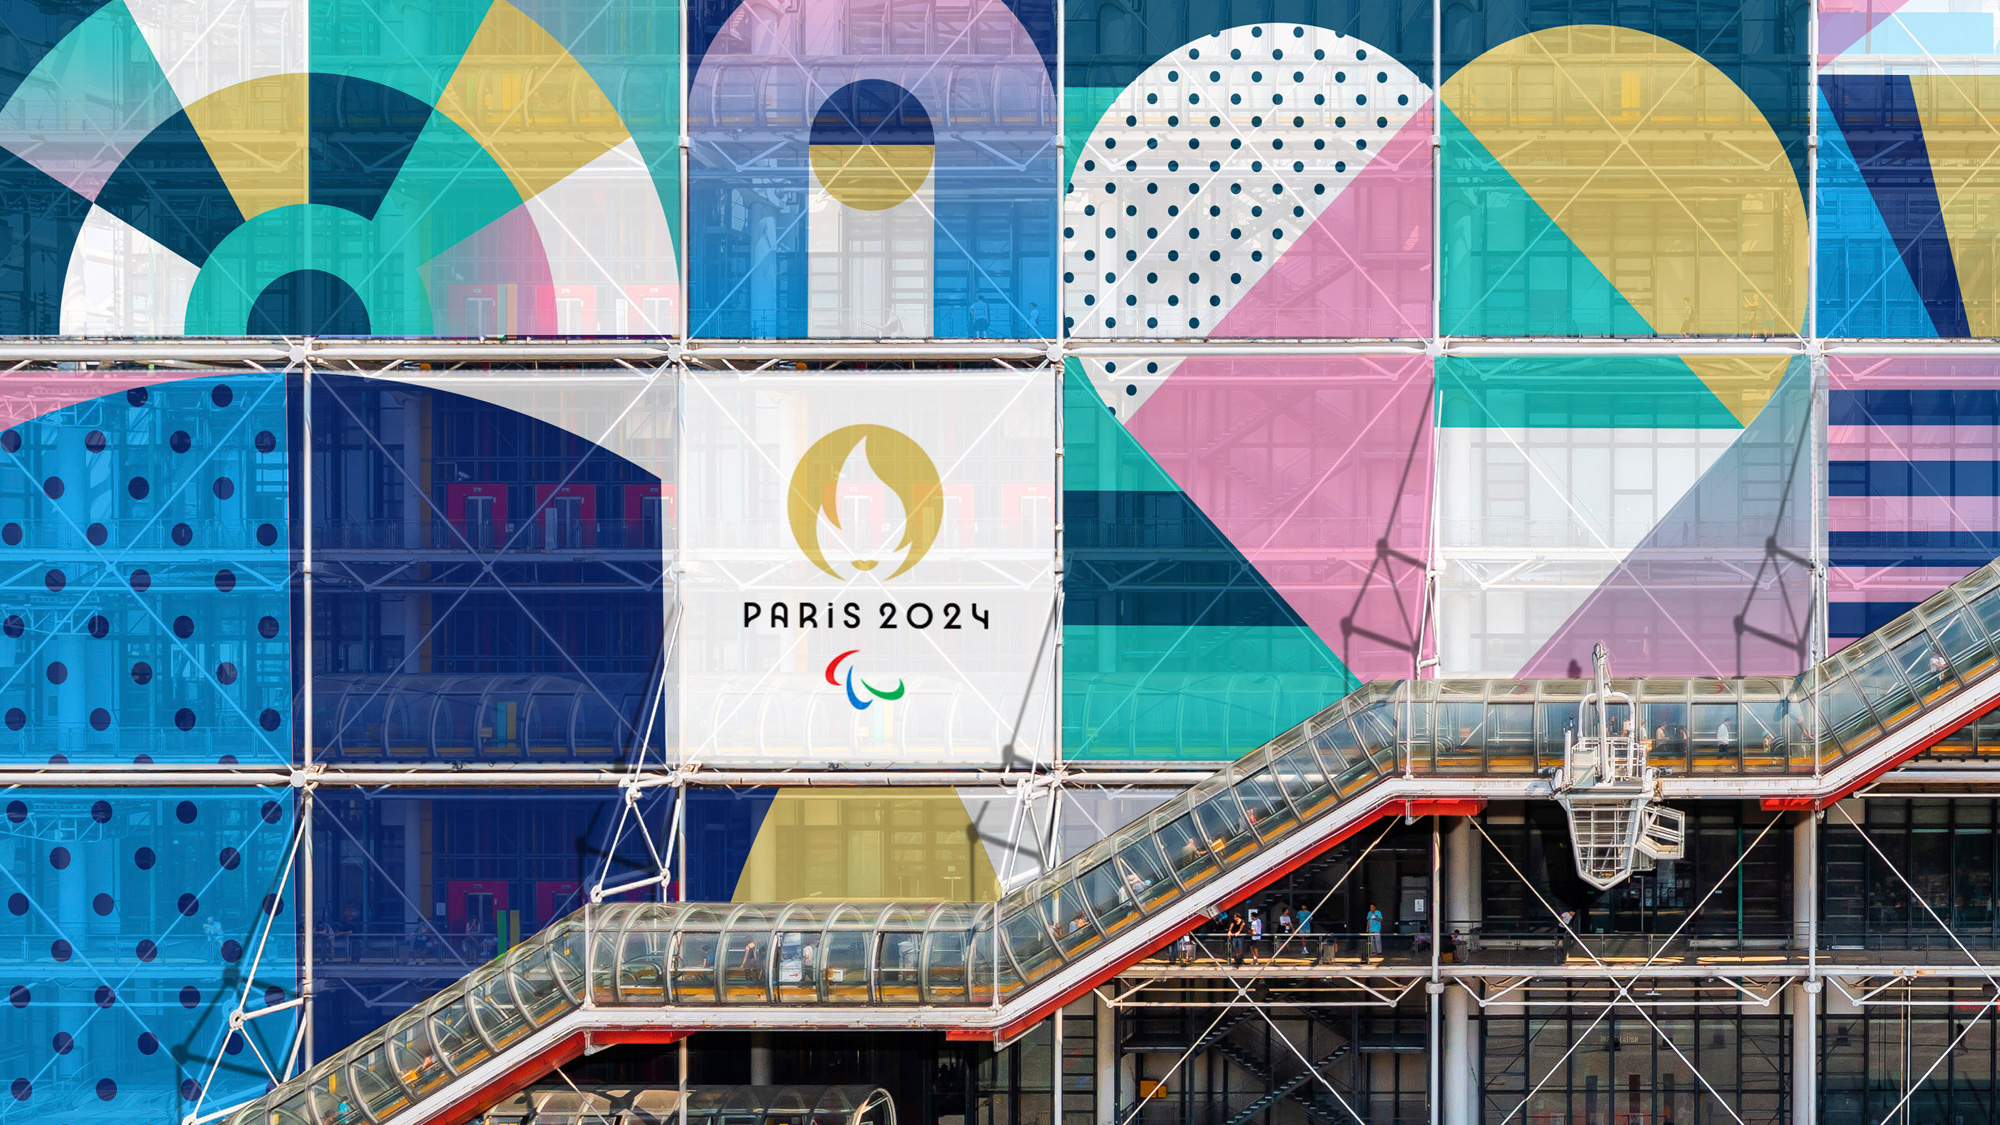 Brand New New Pictograms and Look of the Games for Paris 2024 by W and